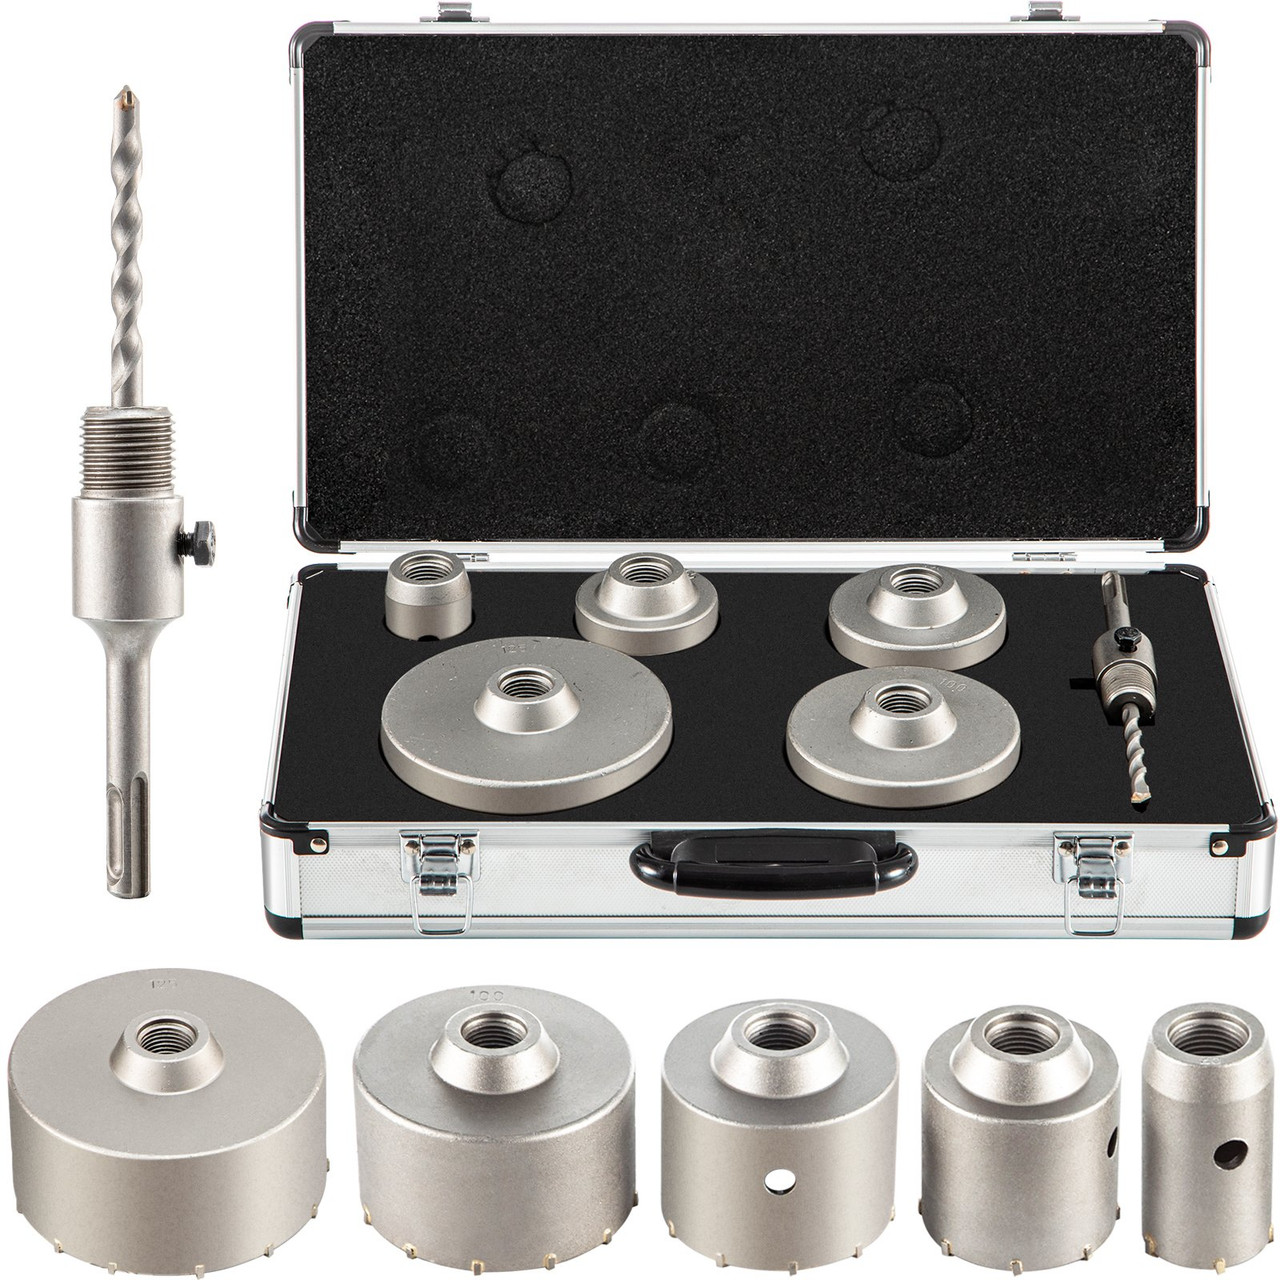 Concrete Hole Saw Kit, 1-3/5", 2-9/16", 3-5/32", 3-15/16", 4-9/10" Drill Bit Set SDS Plus Shank Wall Hole Cutter w/a 4-1/3" Connecting Rod for Brick, Concrete, Cement, Stone Wall, Masonry, Tile